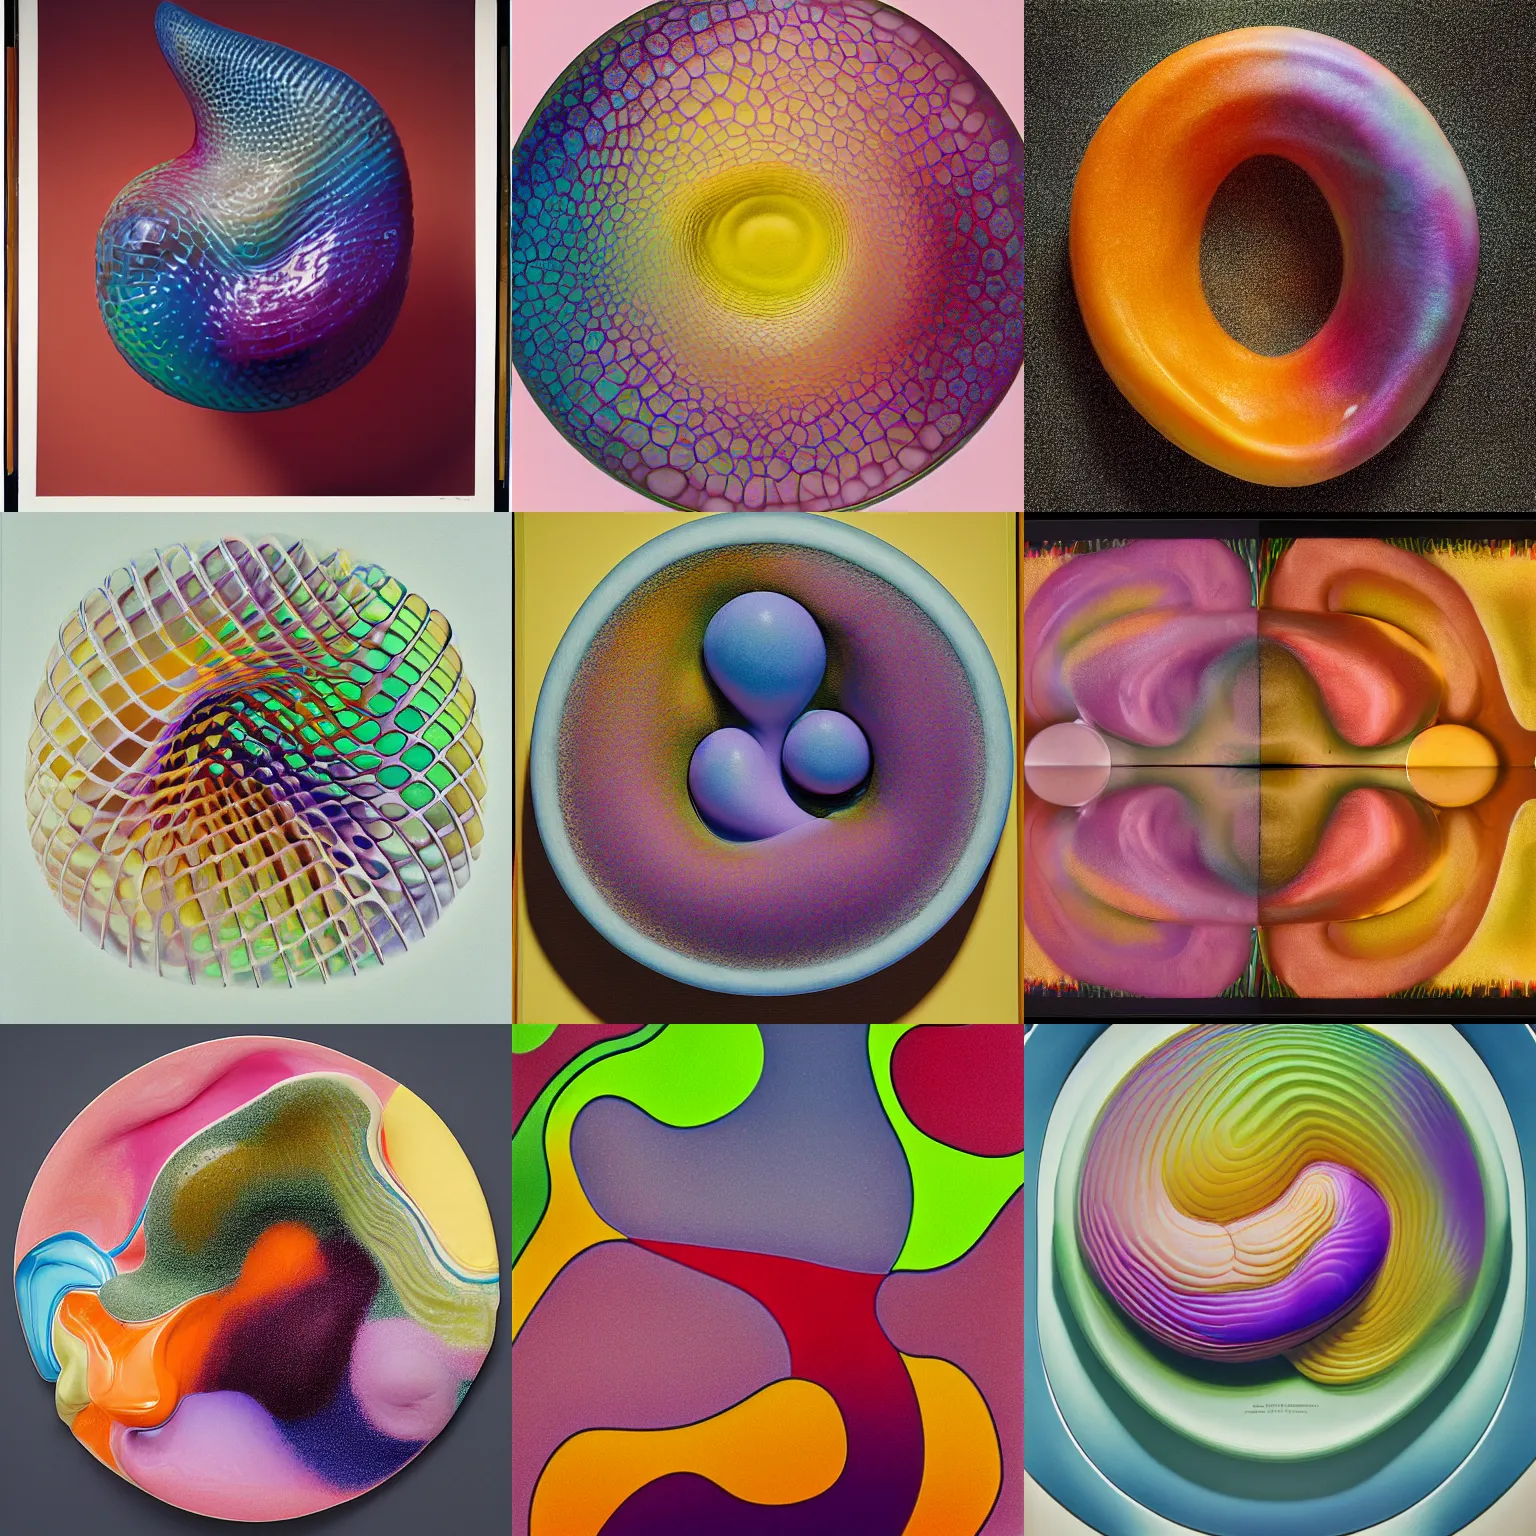 Prompt: one round biomorphic form with gradient pastel colors, by chuck close and thomas moran, professional food photography